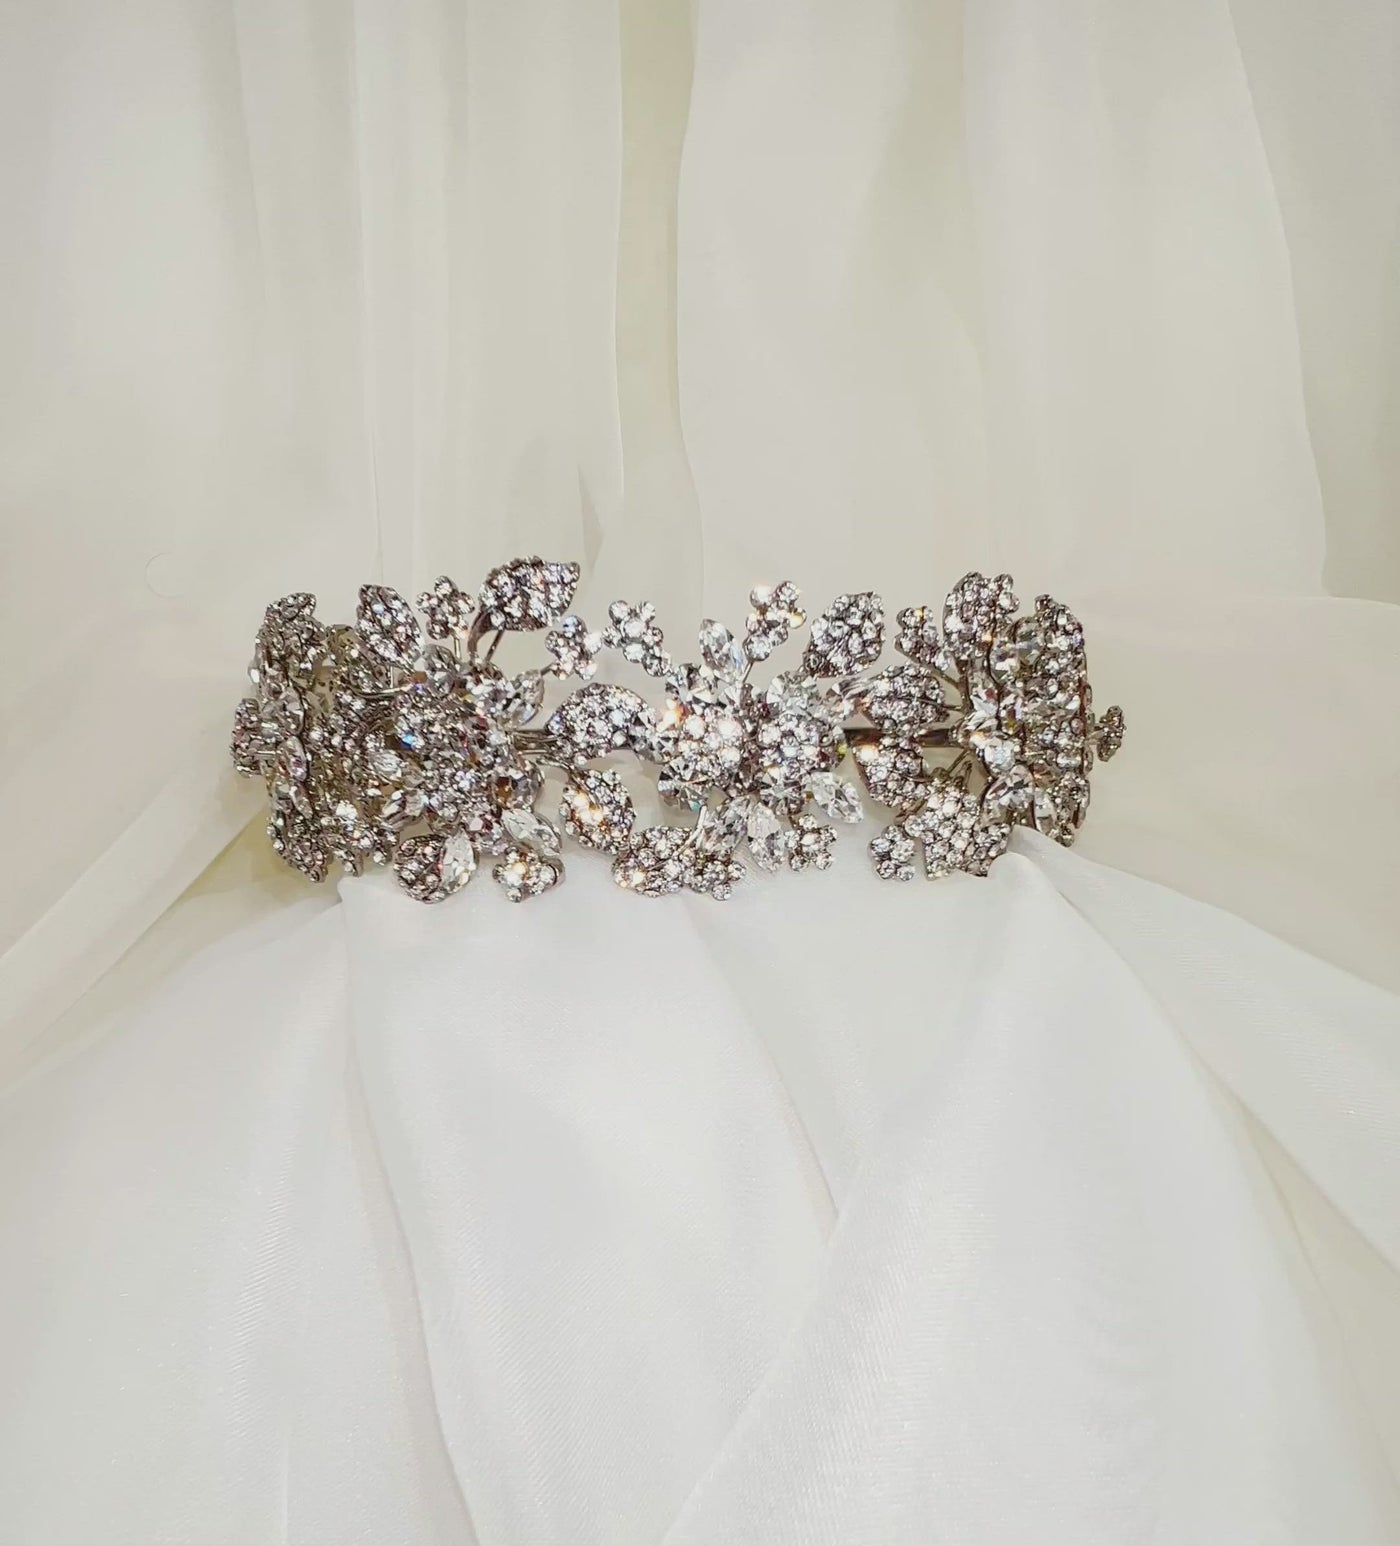 silver bridal headband with various crystal flowers and sparkling clusters